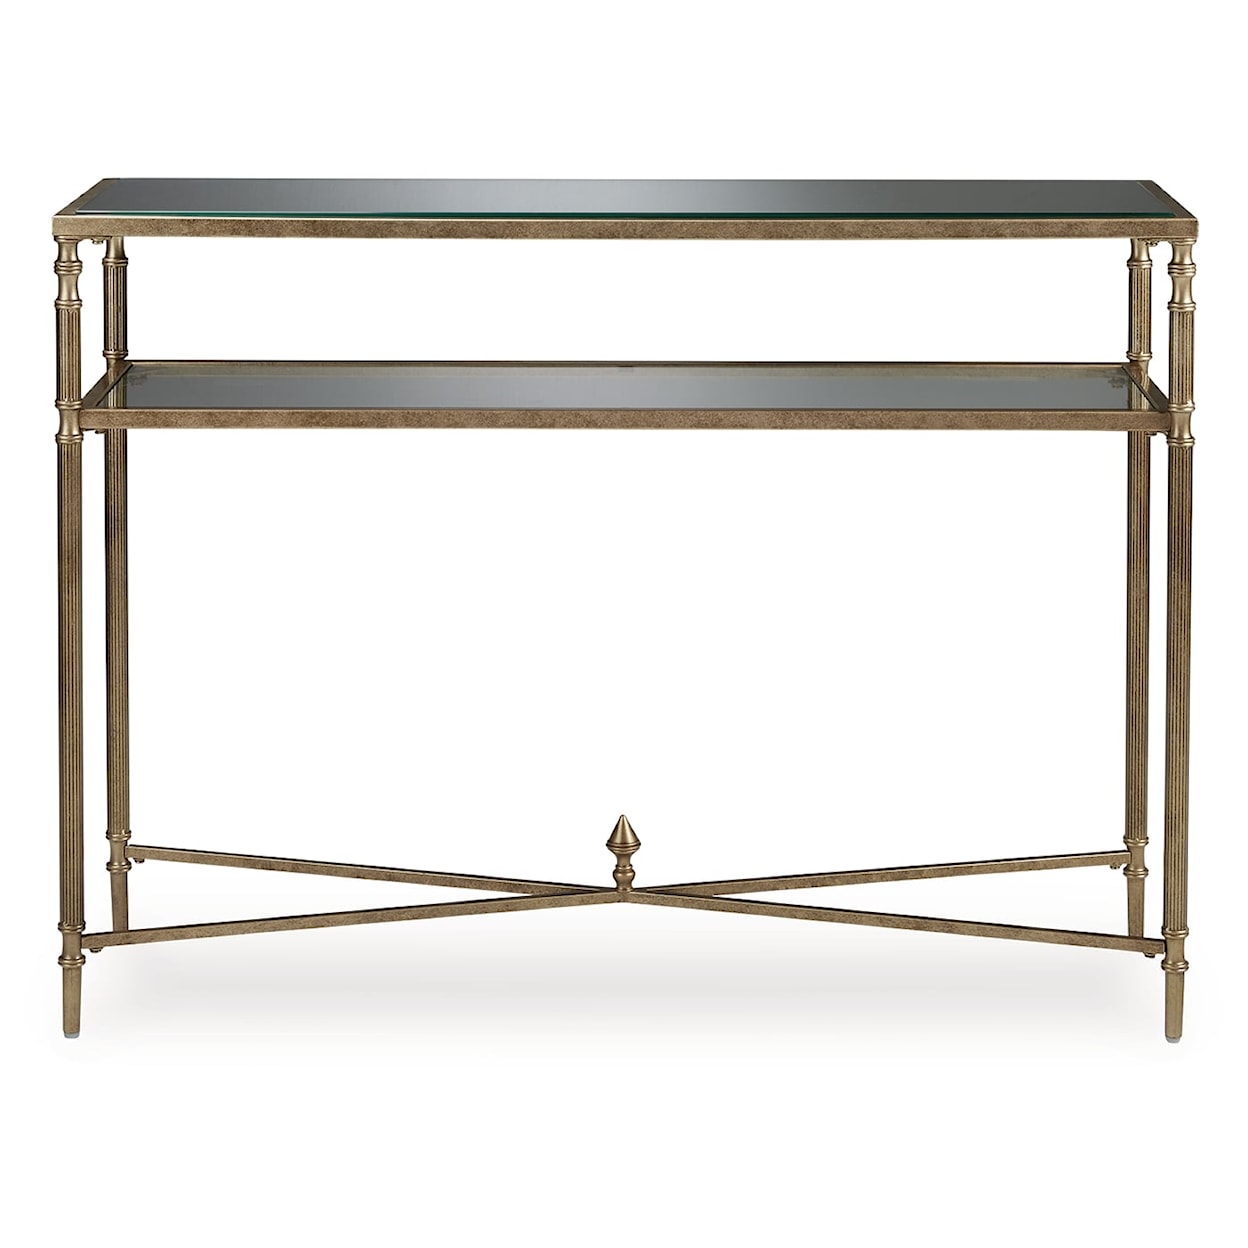 Signature Design by Ashley Cloverty Sofa Table